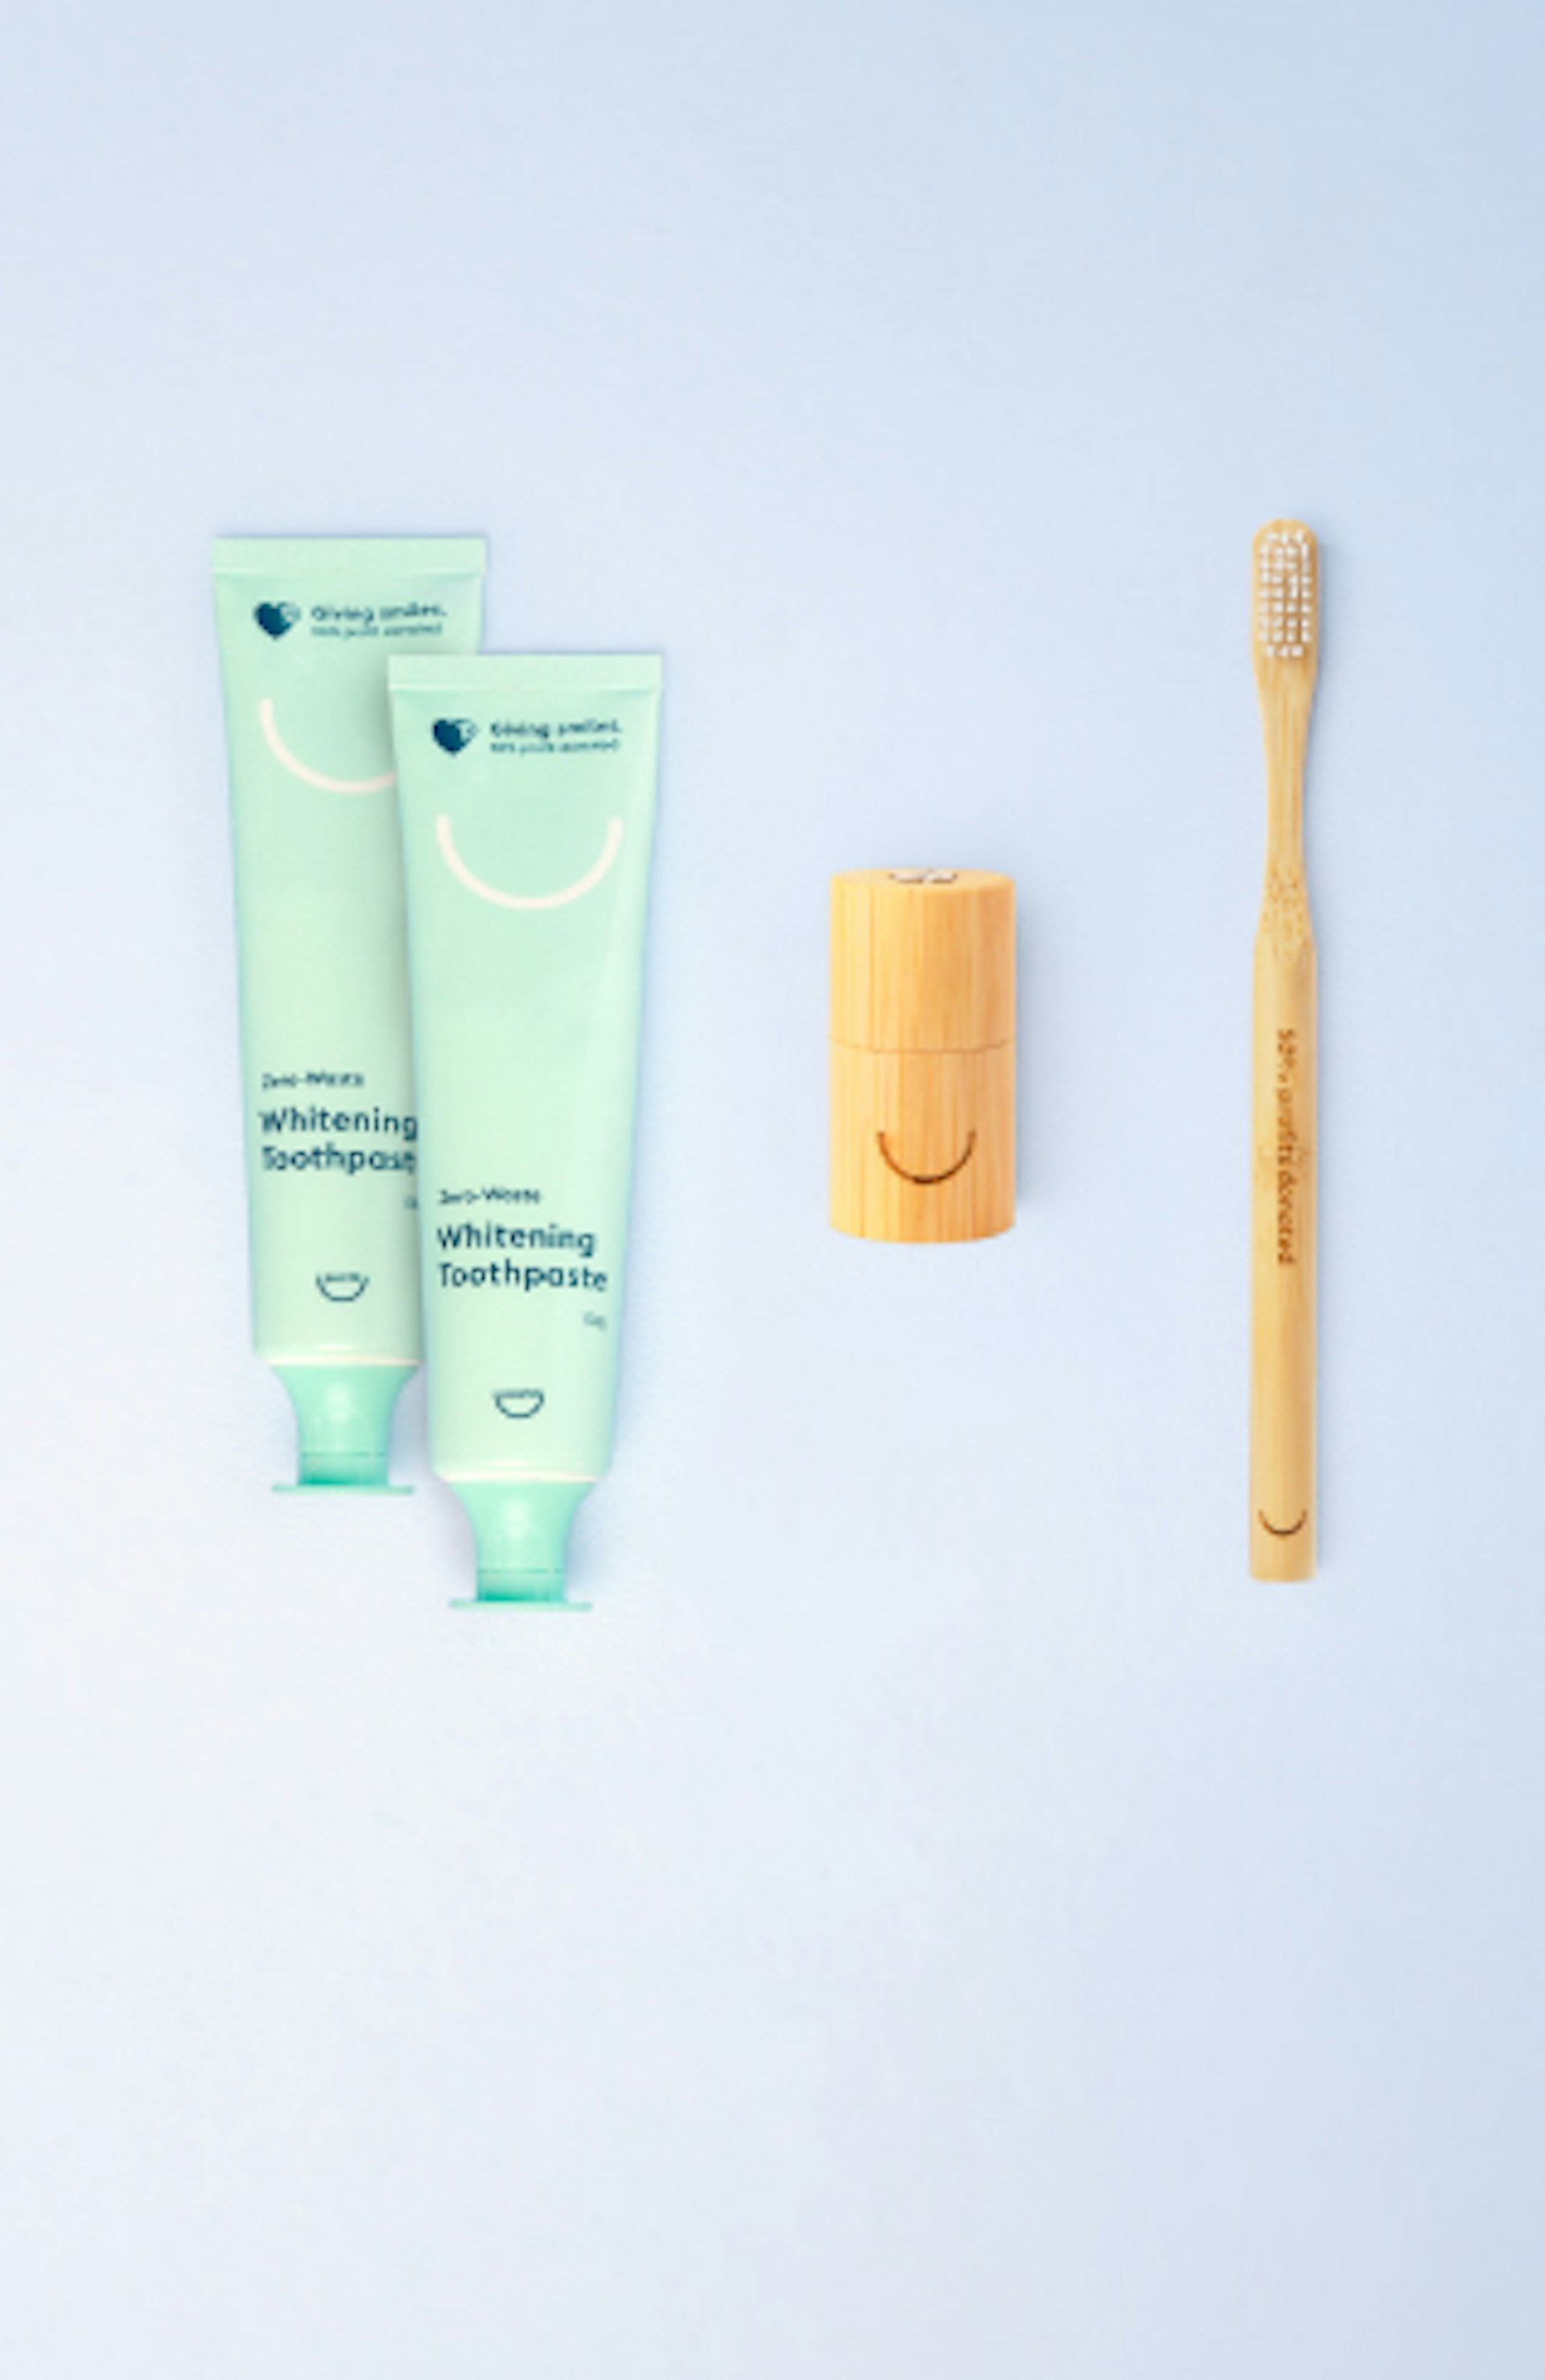 Marketing image of Pearlii products, showing the Essentials Pack, including: 1x Mosobrush, 2 x Zero-Waste Whitening Toothpastes, and 2 x Biofloss Easy Picks packs